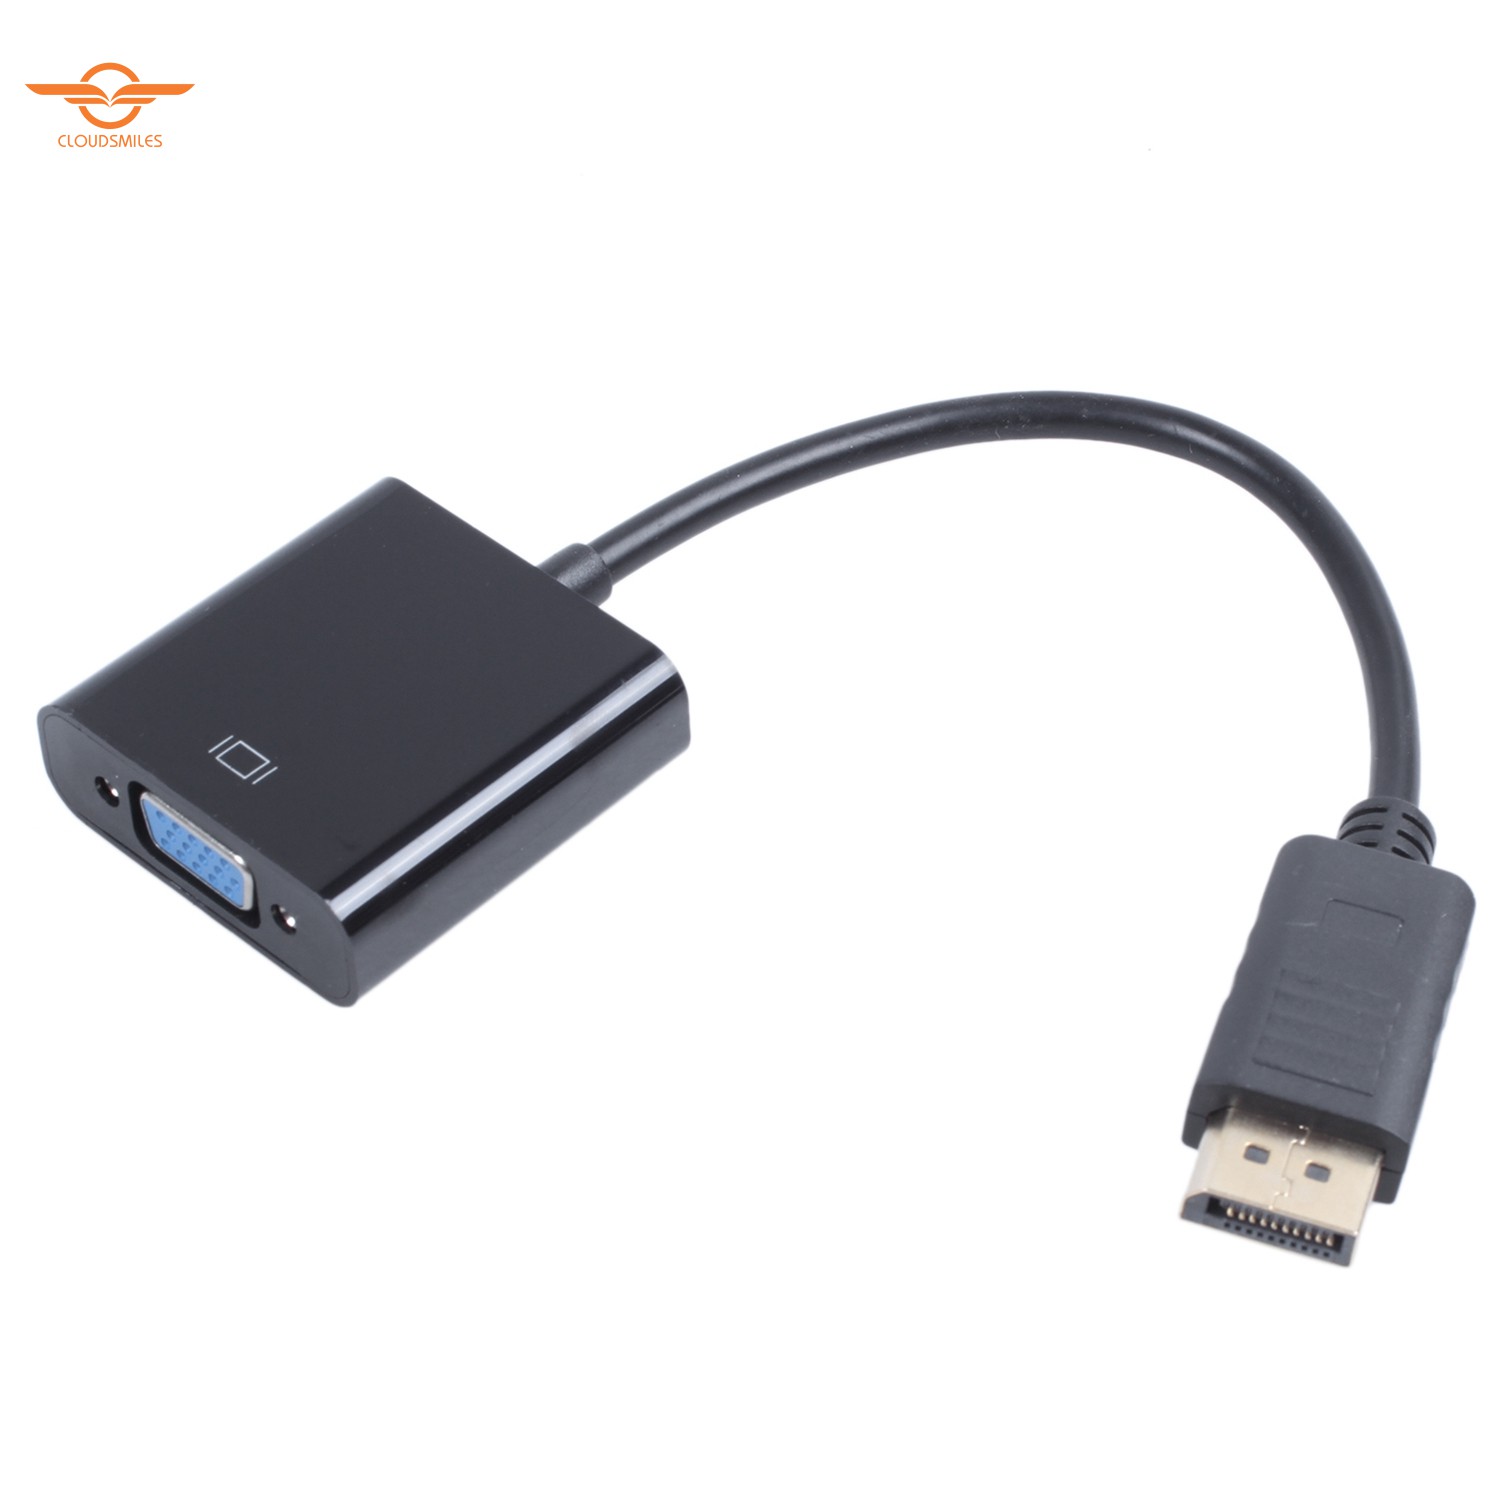 1080p DP DisplayPort Male to VGA Female Converter Adapter Cable